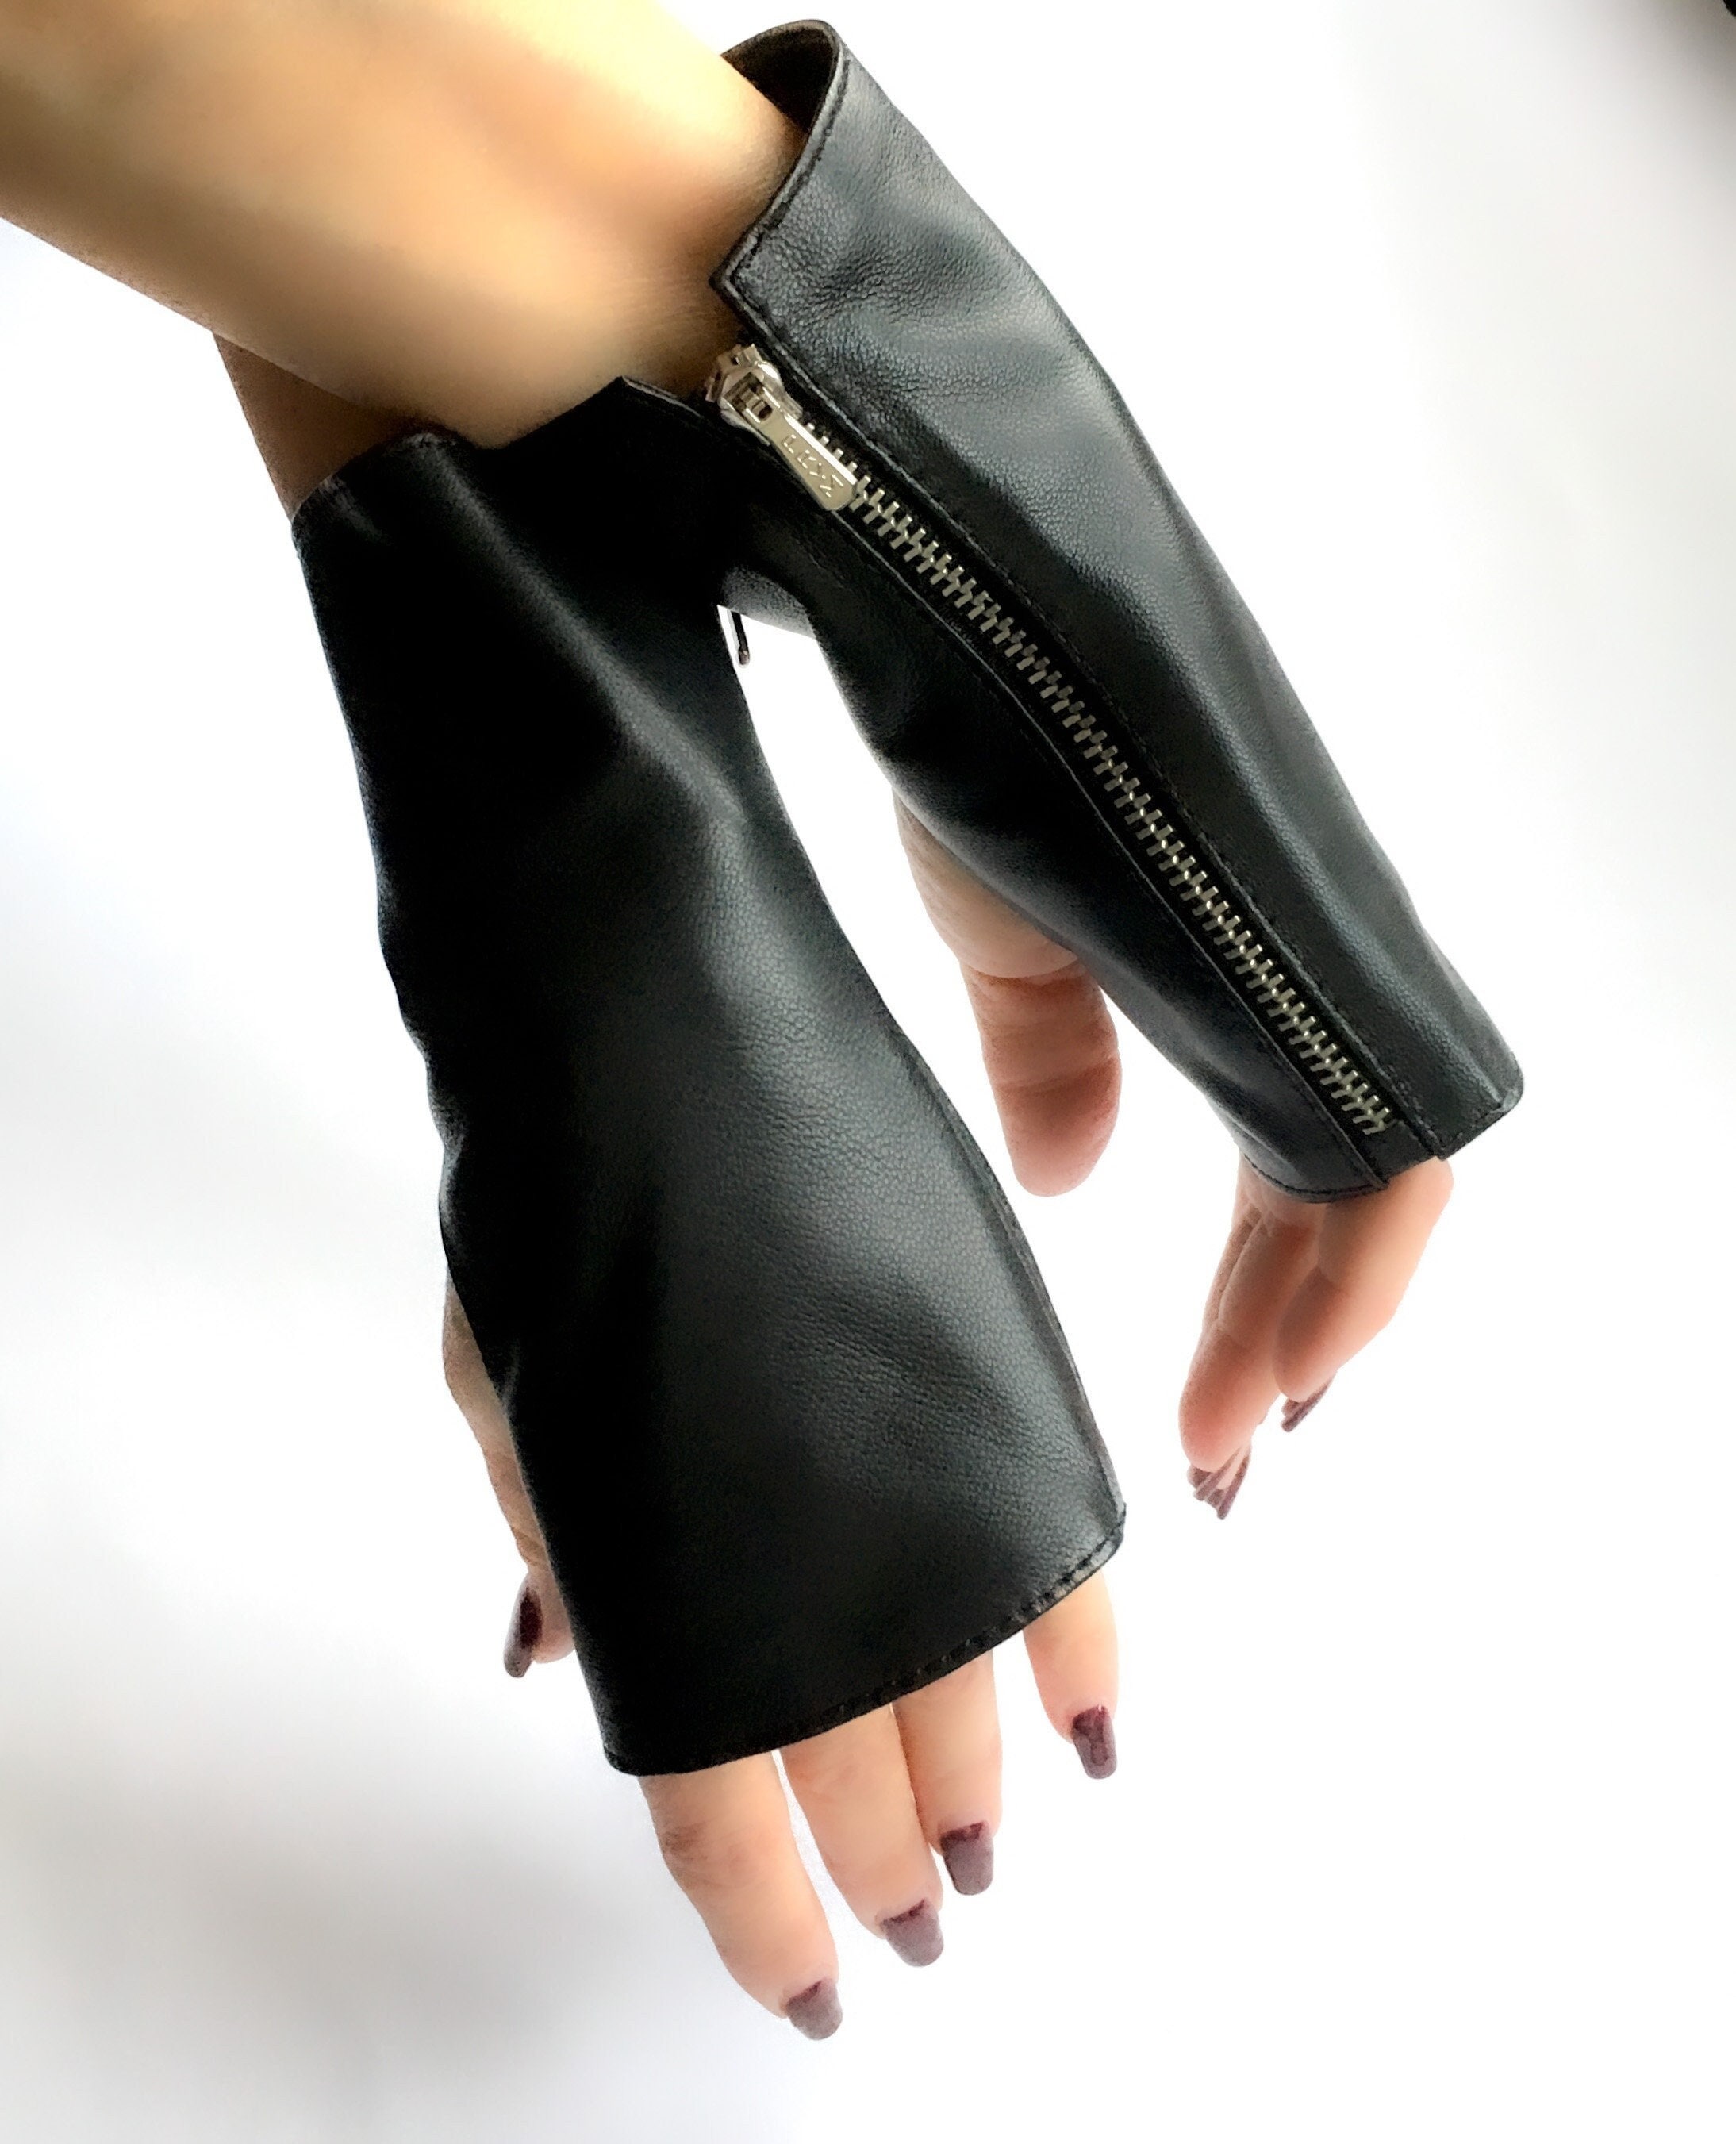 Simple leather arm warmers pair